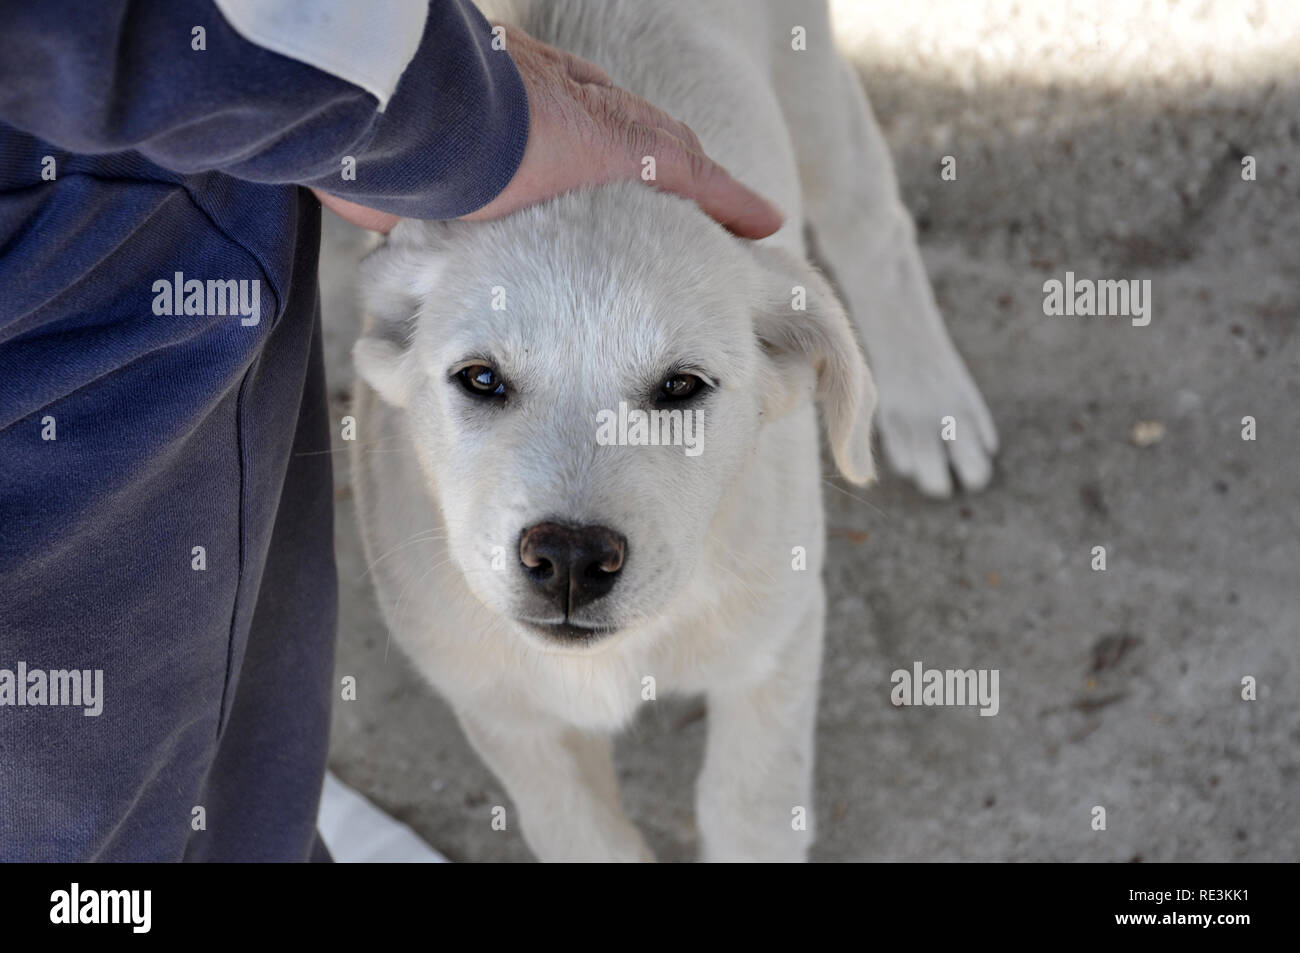 someone touch friendly a white dog Stock Photo